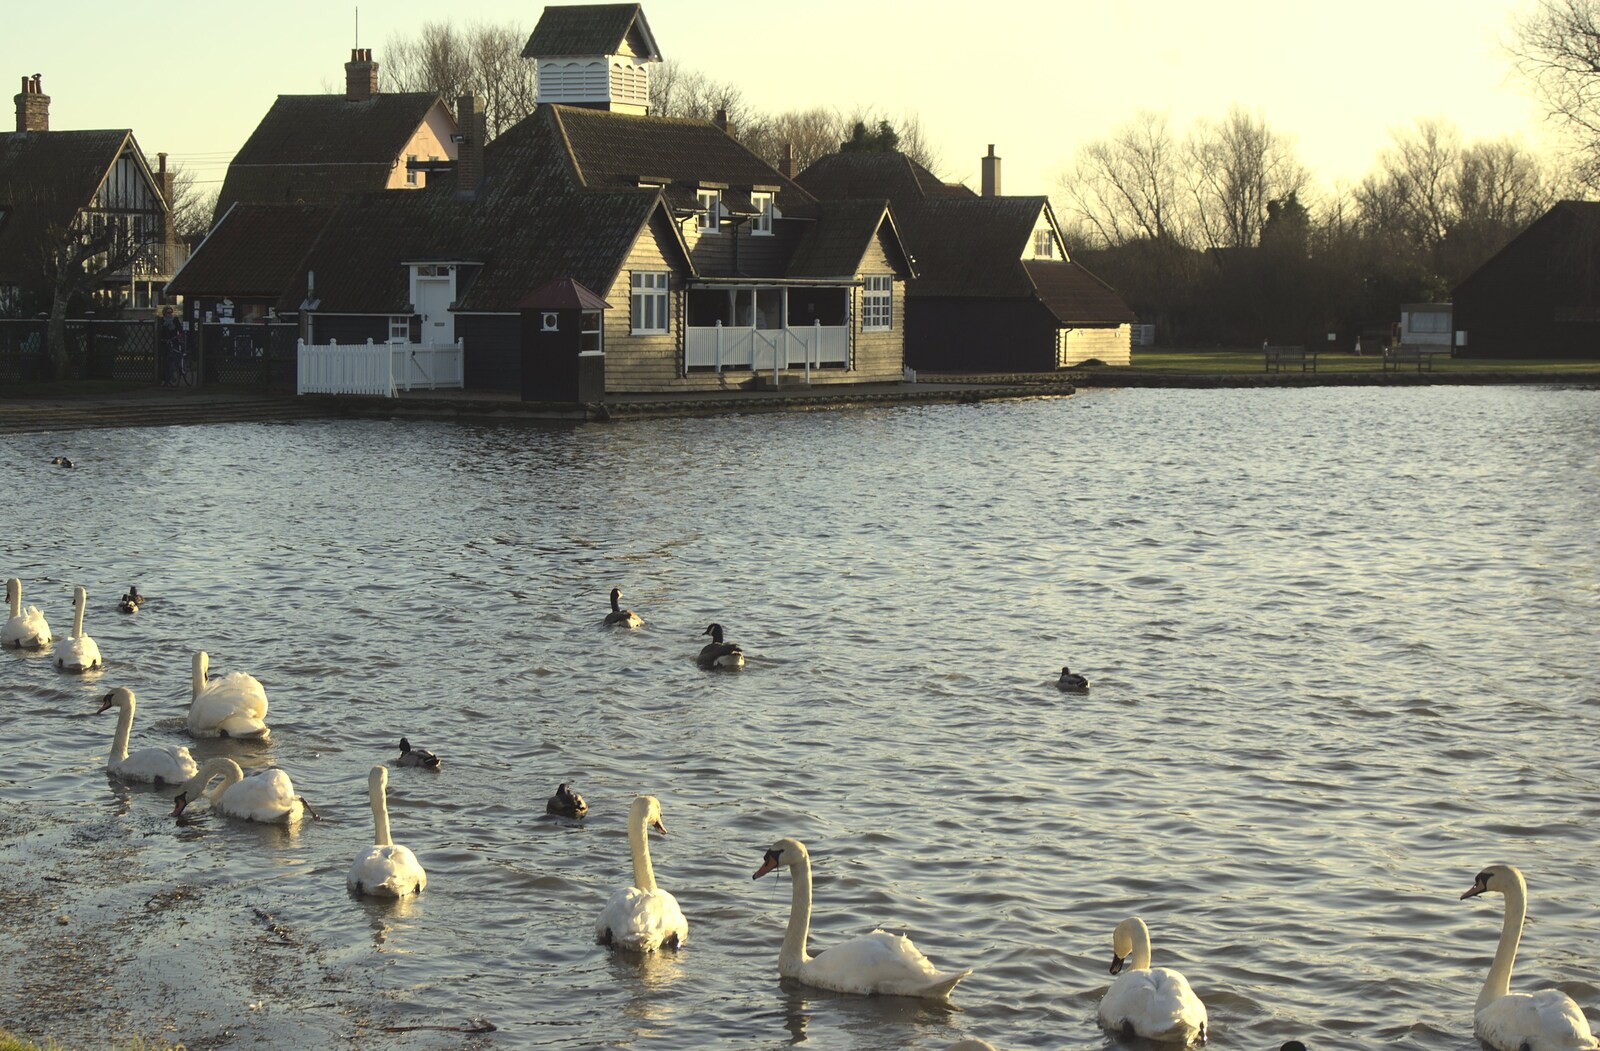 A Trip to Thorpeness, Suffolk - 9th January 2011: A procession of swans